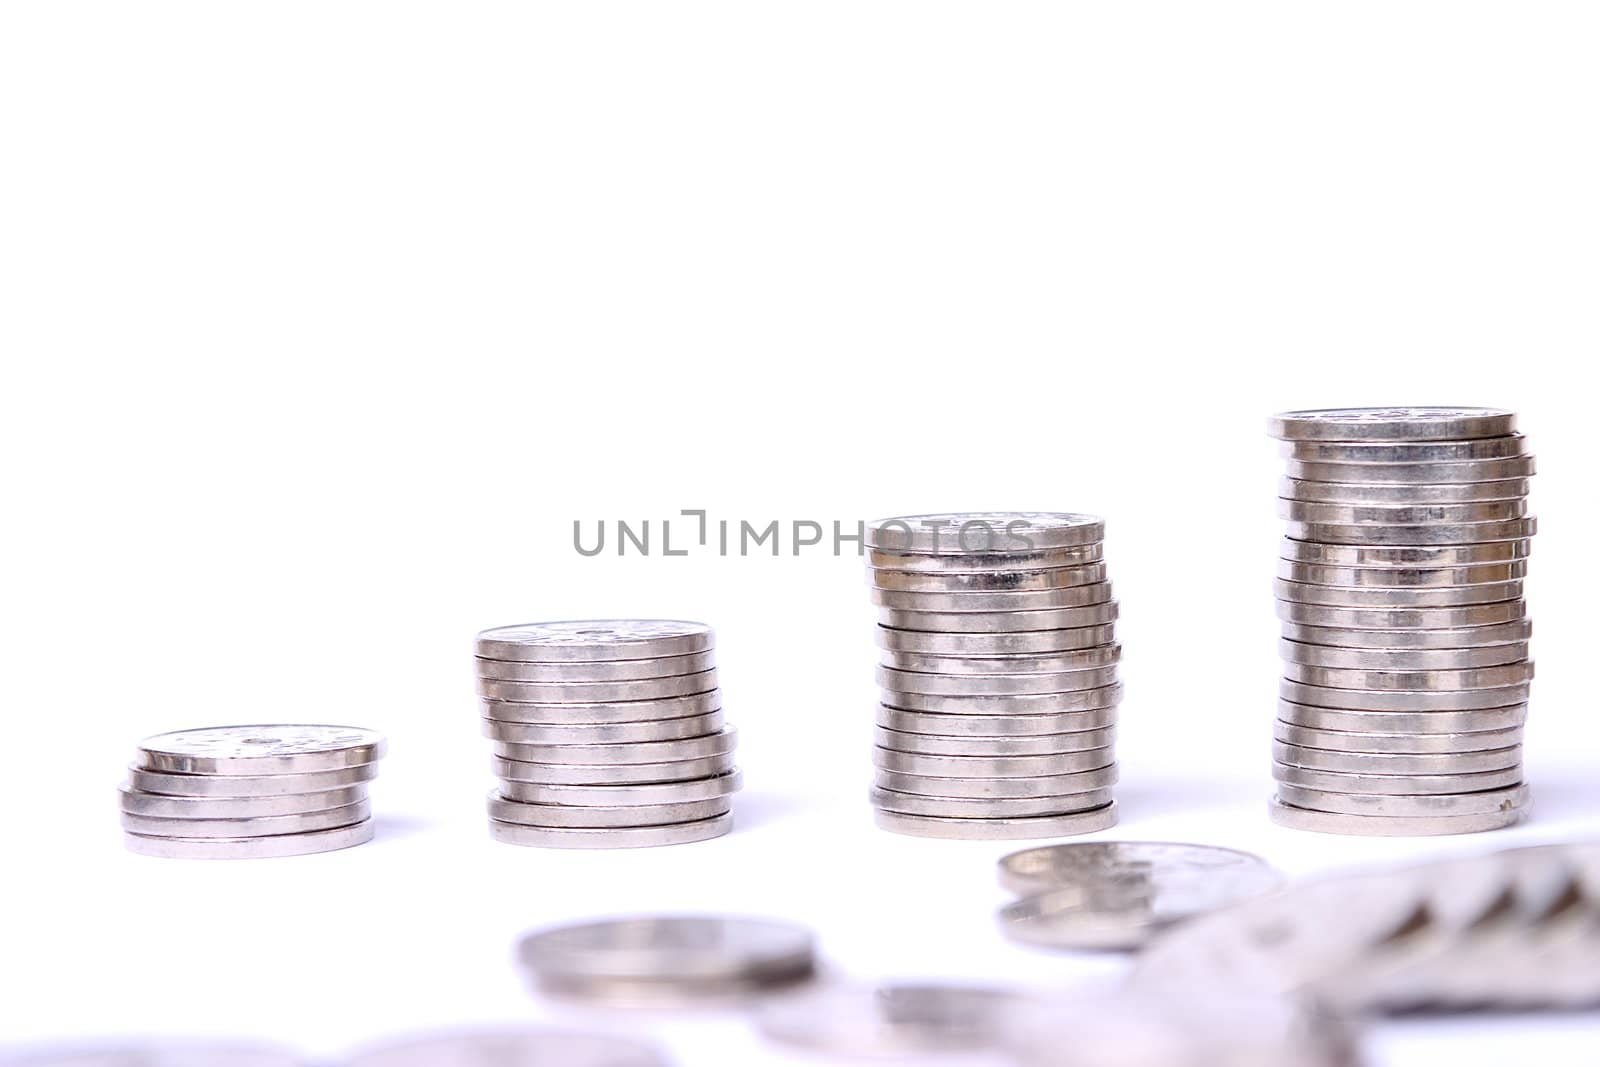 Stacks of coins isolated on white background.